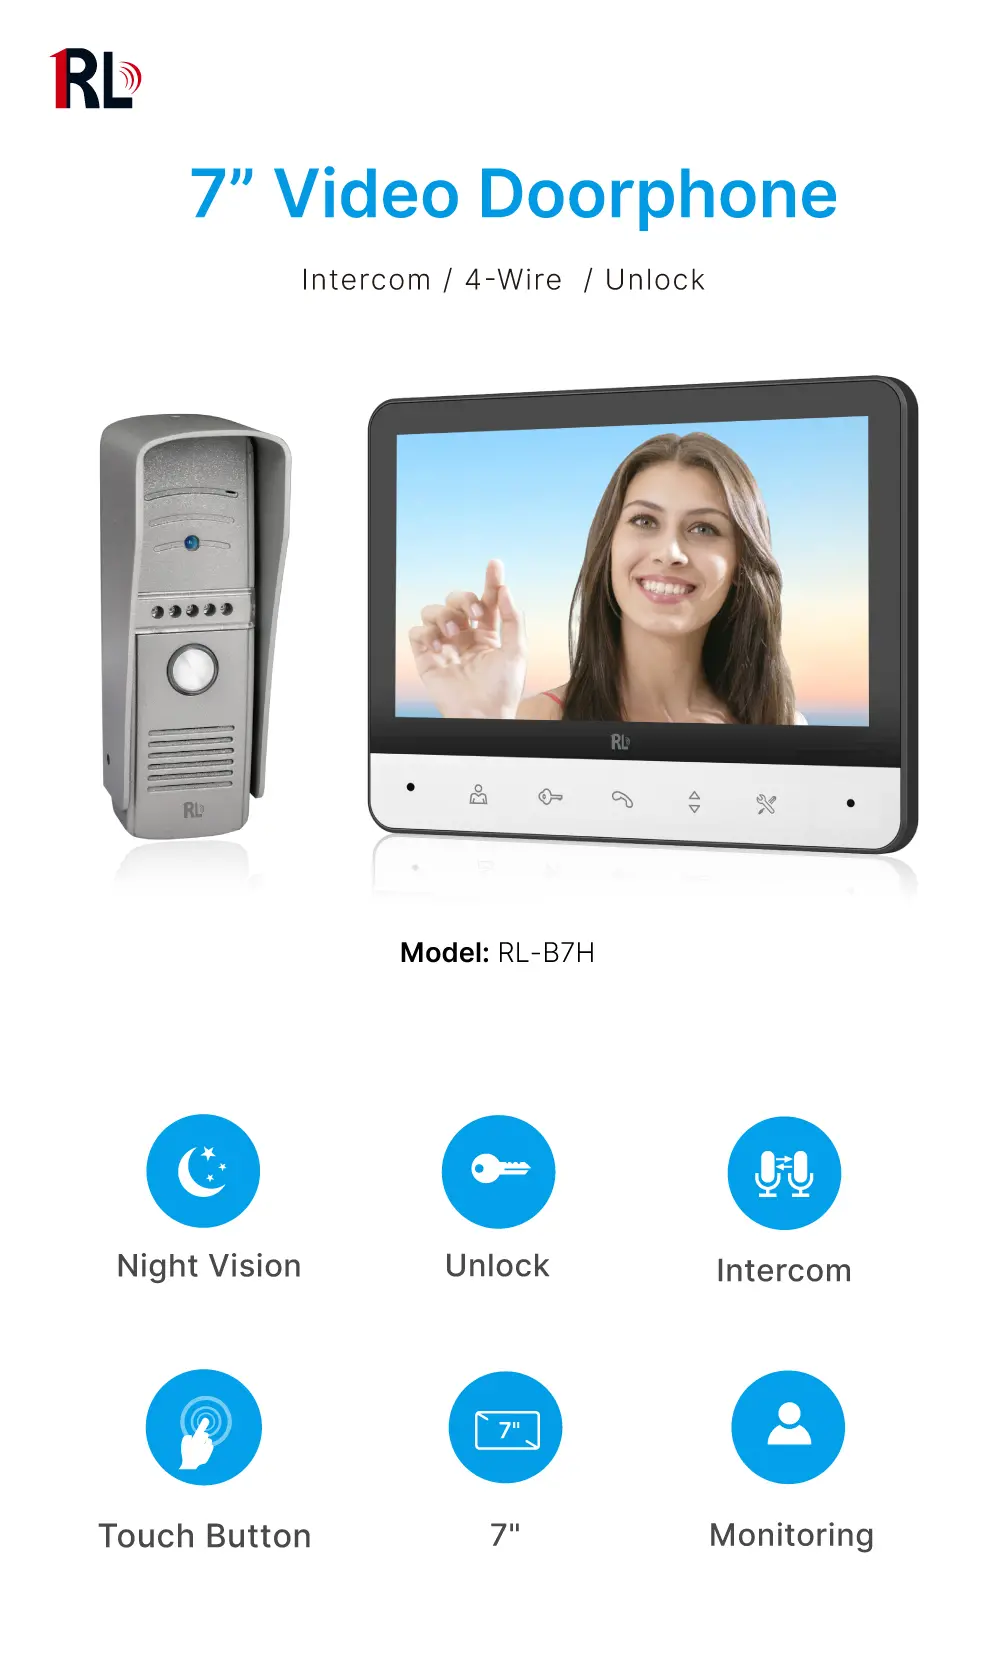 7inch Video Doorphone #RL-B7H- 7inch TFT screen with widescreen images and no radiation, low power consumption but high definition. Water-proof, oxidation-proof, _01